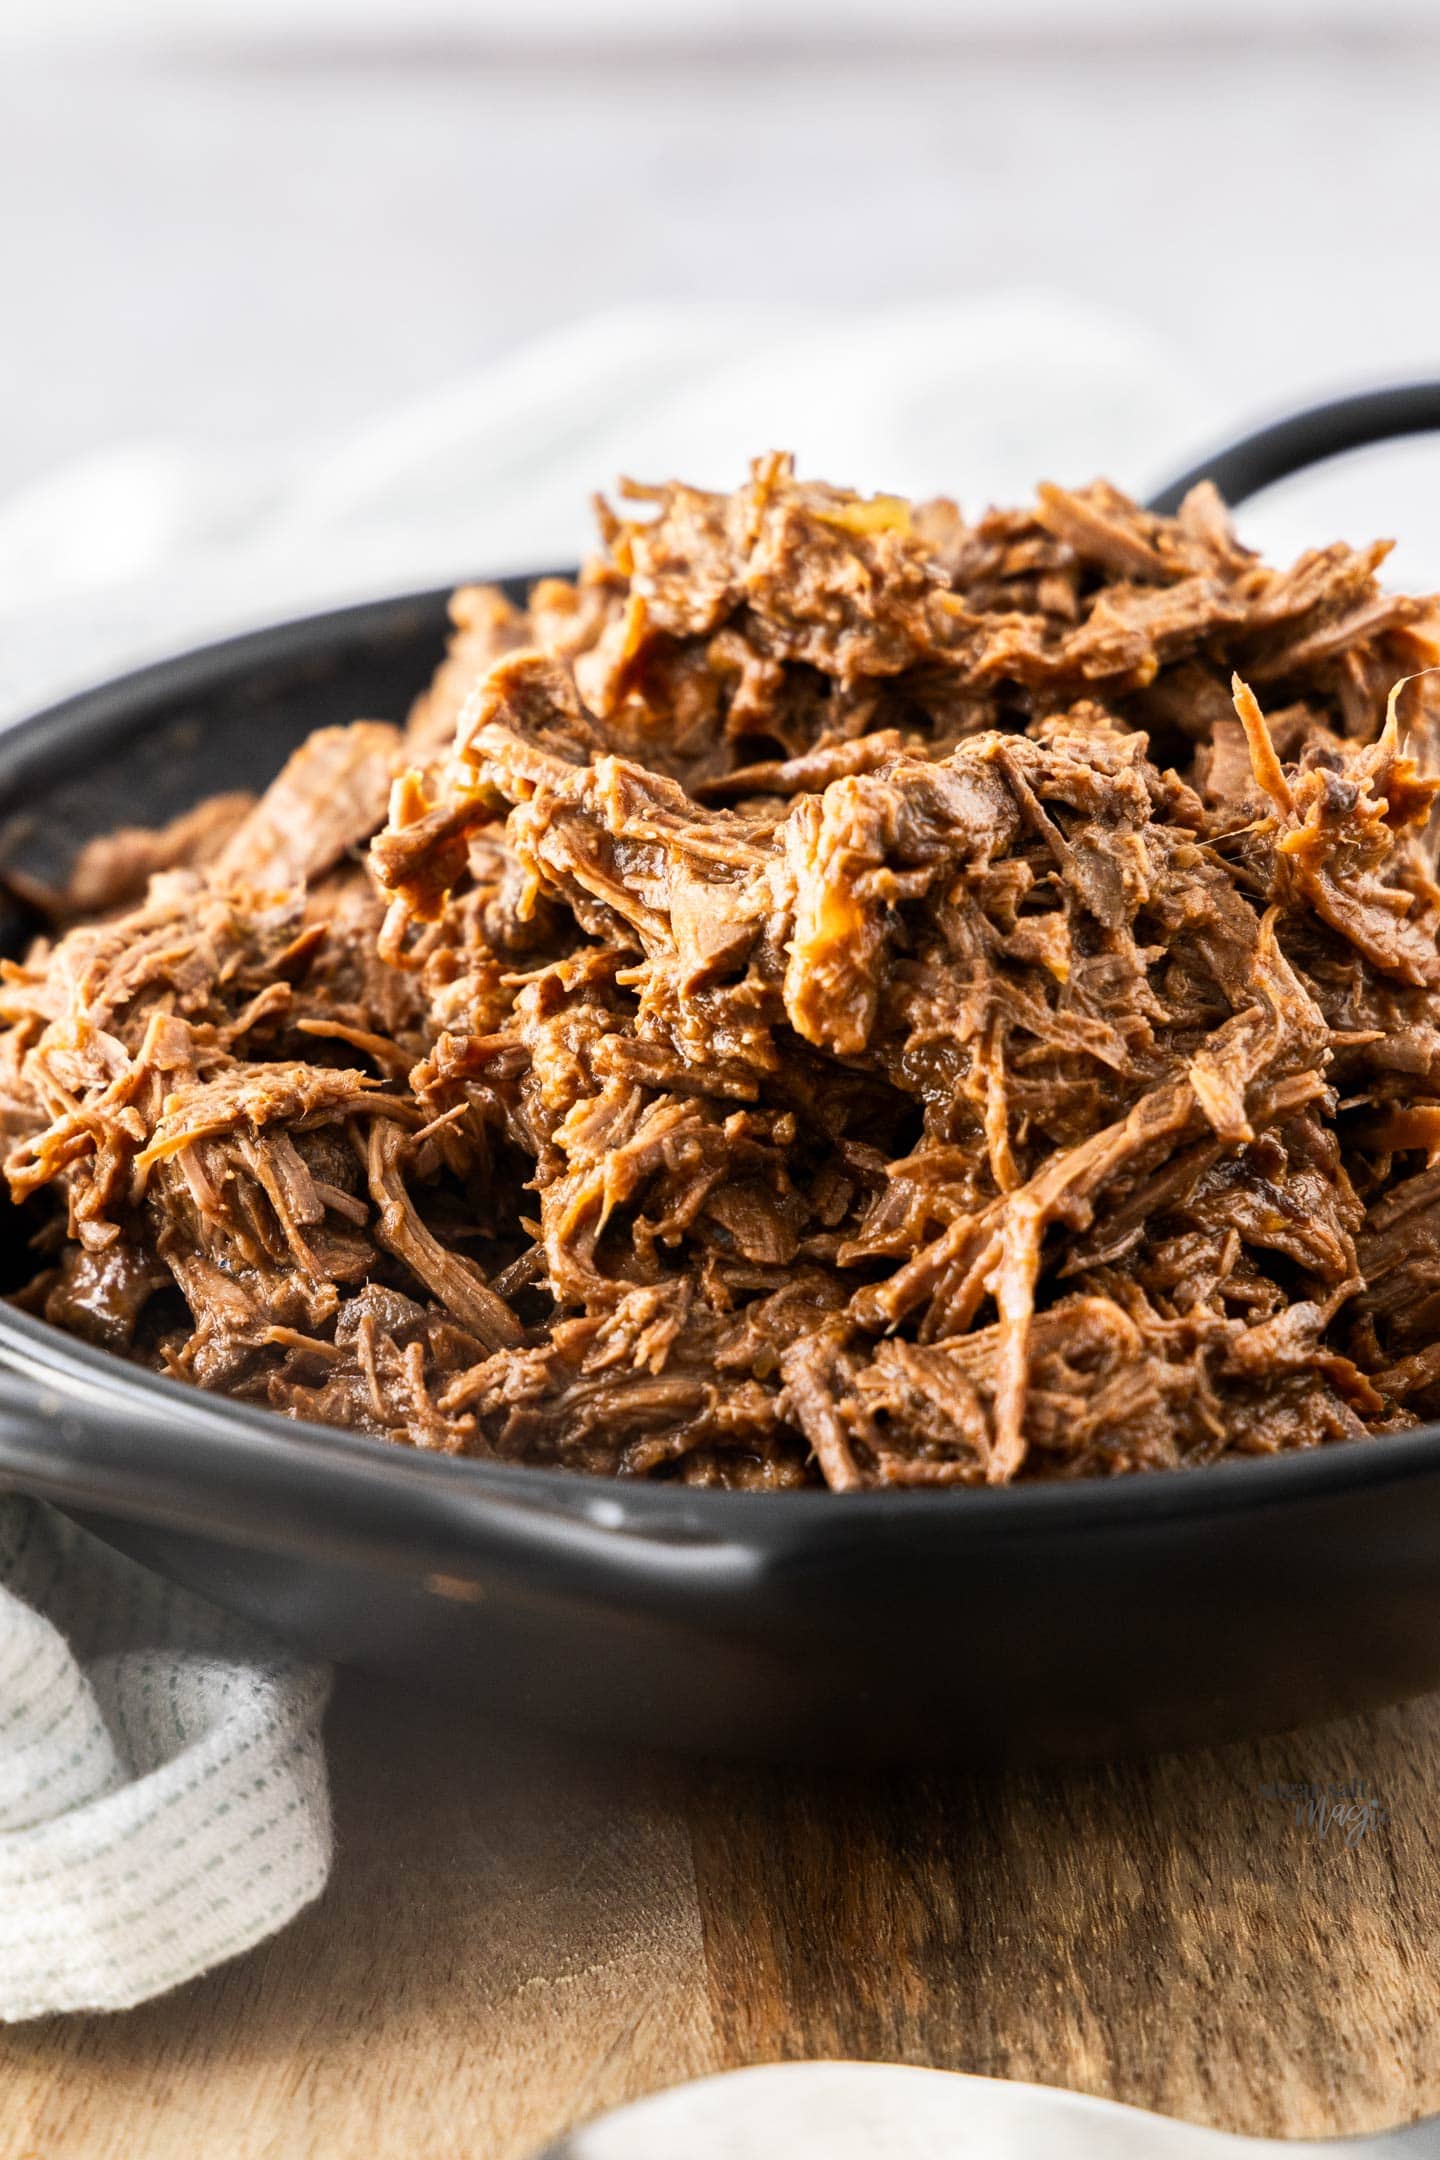 Pulled beef piled high in a black bowl.